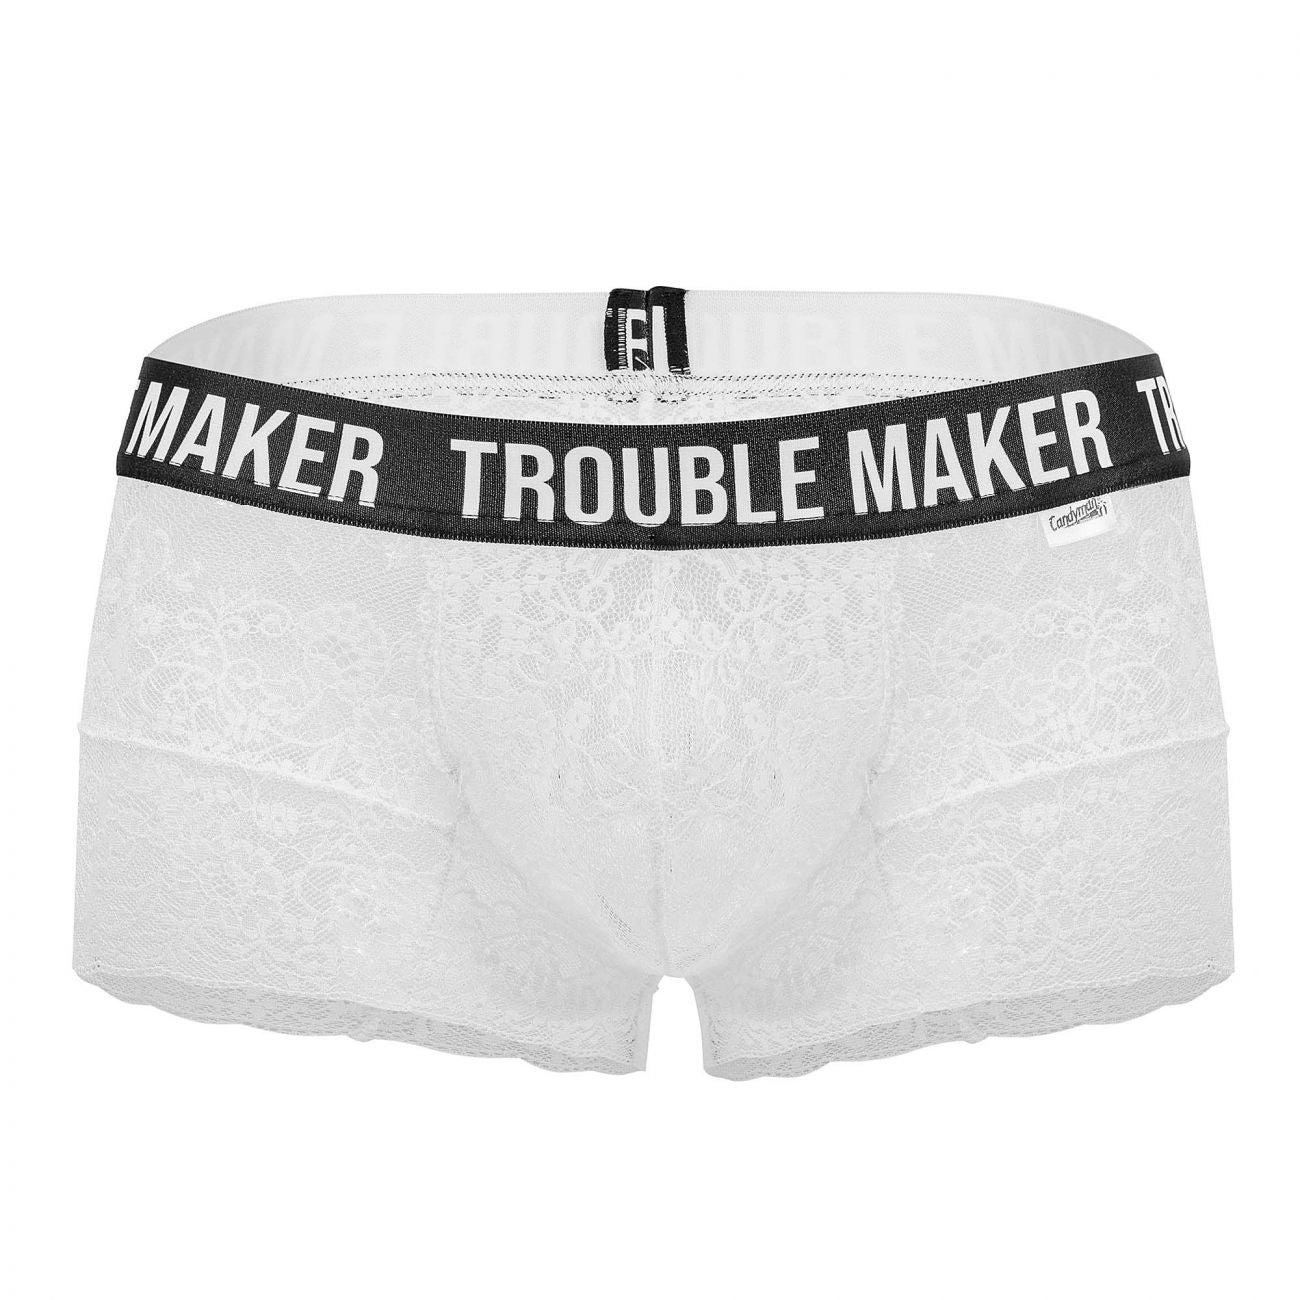 CandyMan 99616X Trouble Maker Lace Trunks